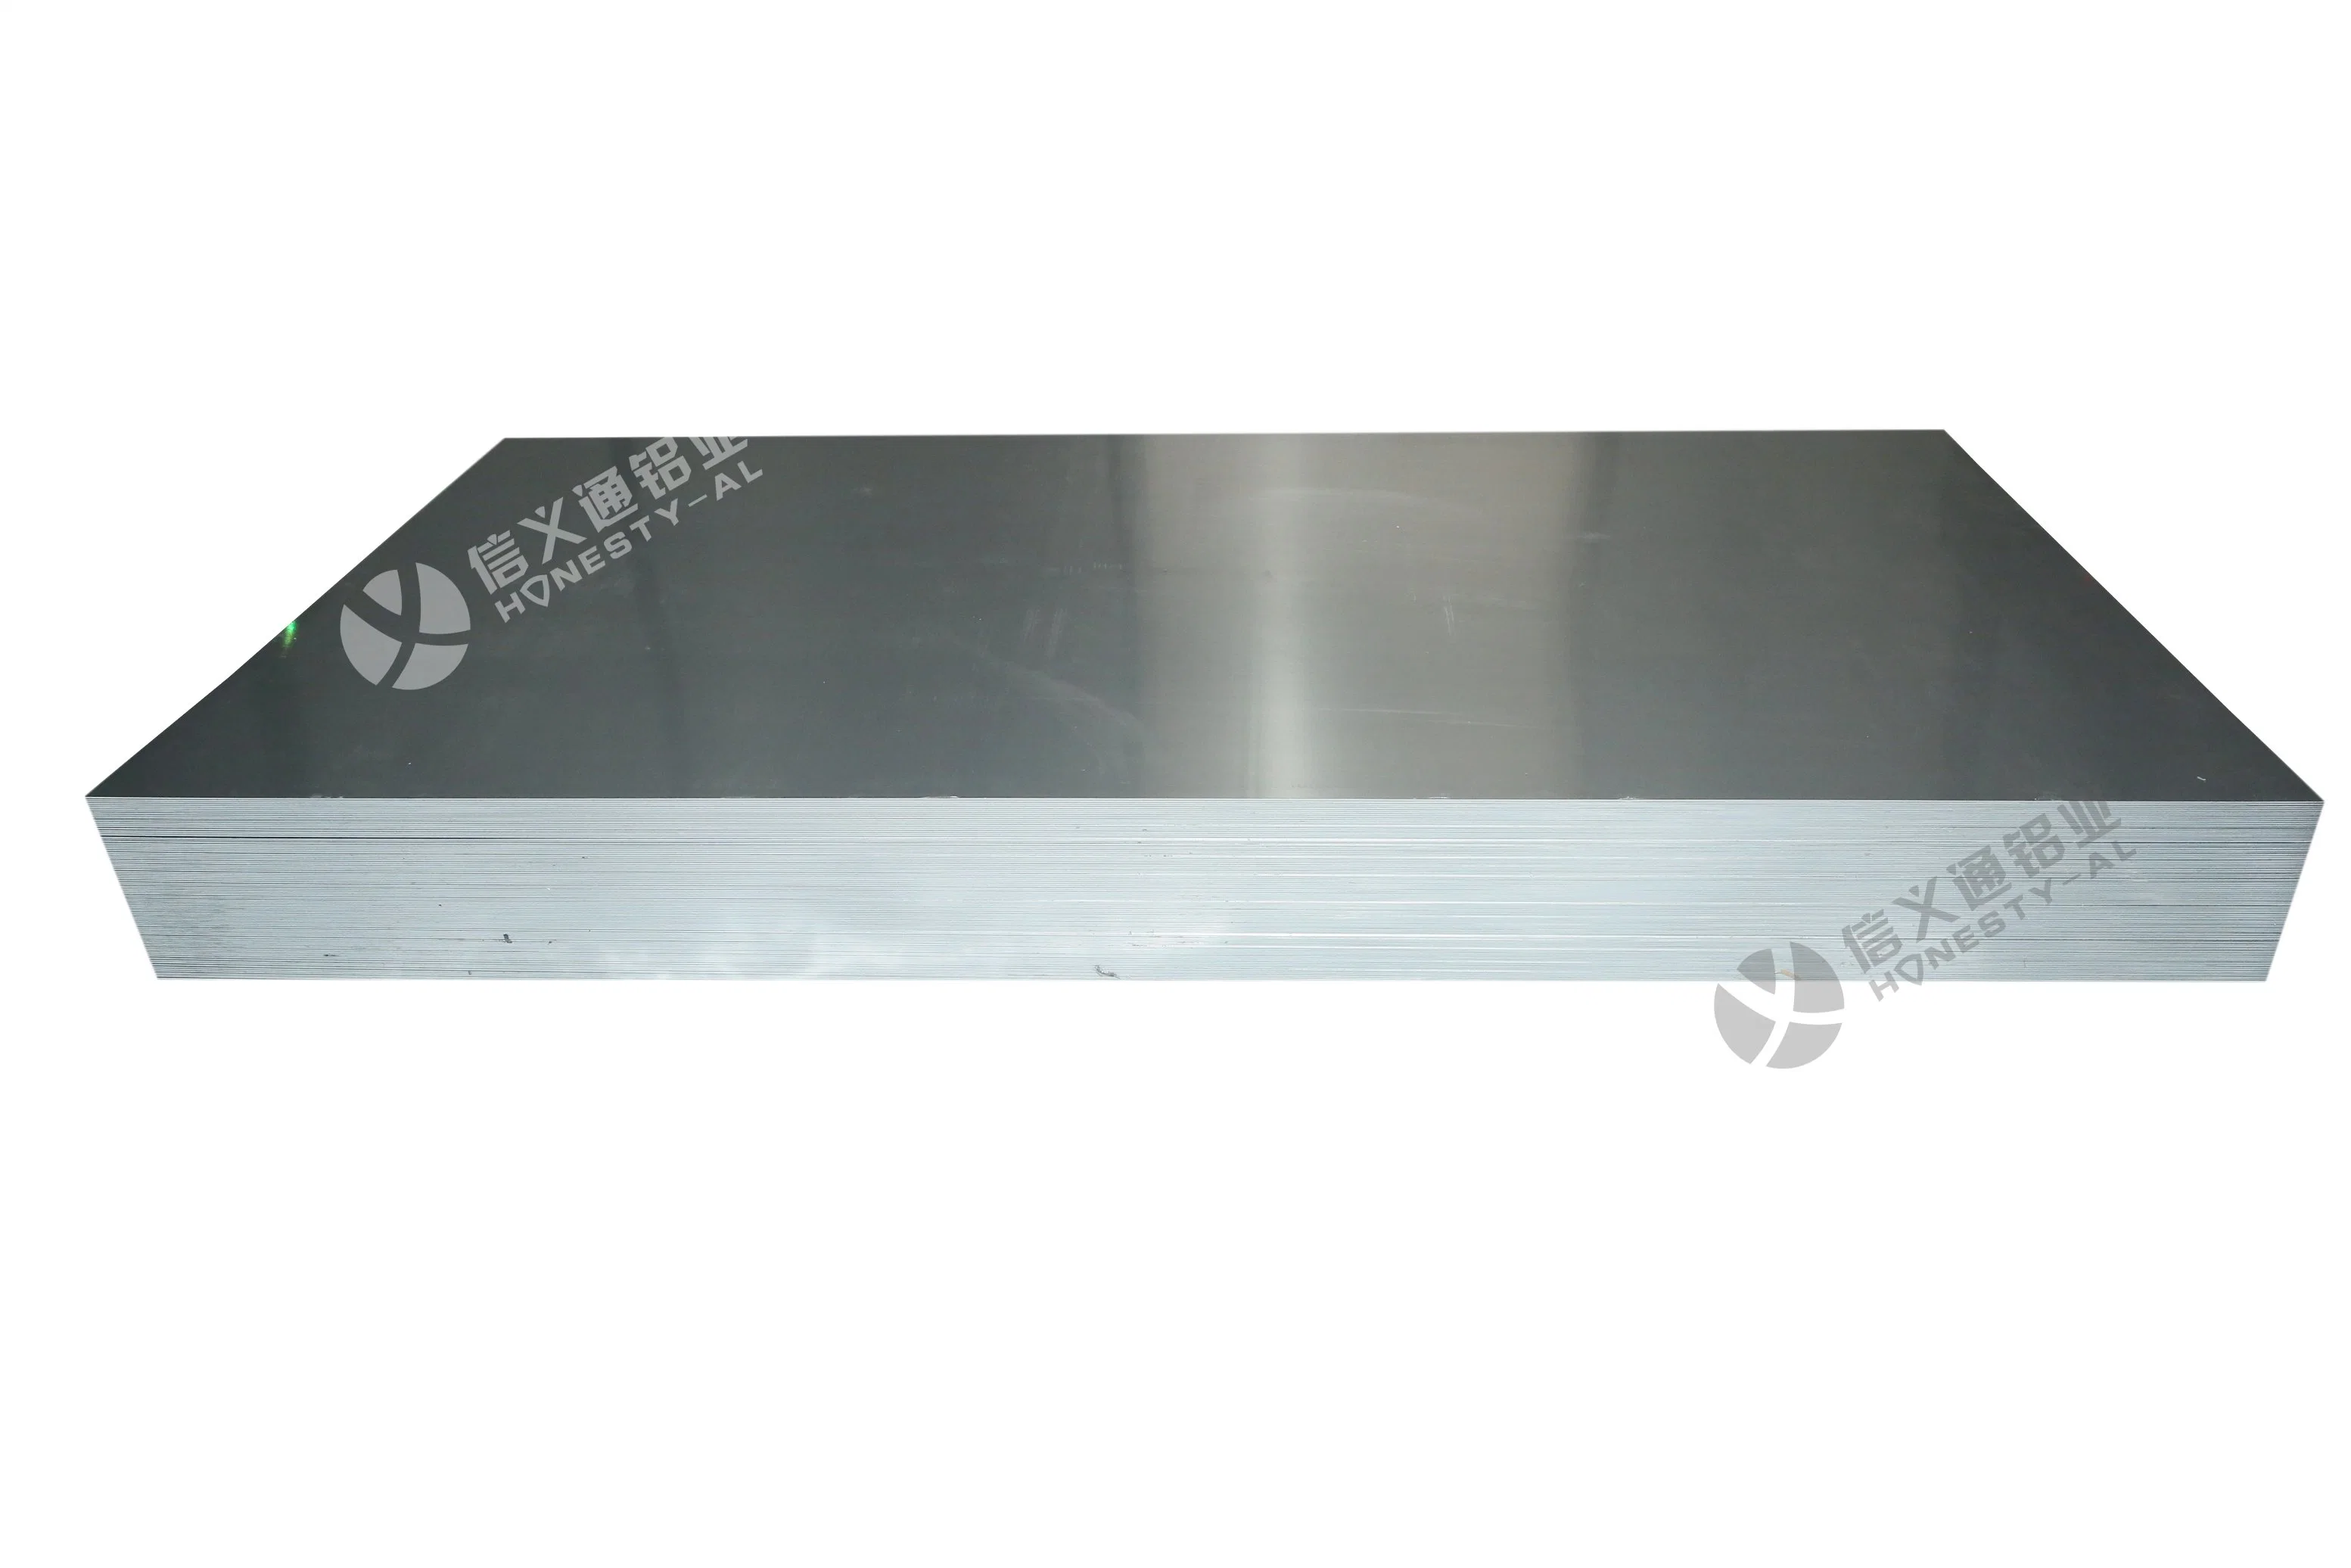 RoHS 5 Series Polished Aluminum Alloy Plate 5182 Mirror Aluminum Plate for Electronic Product Shell, Lighting, Interior Decoration, Signage